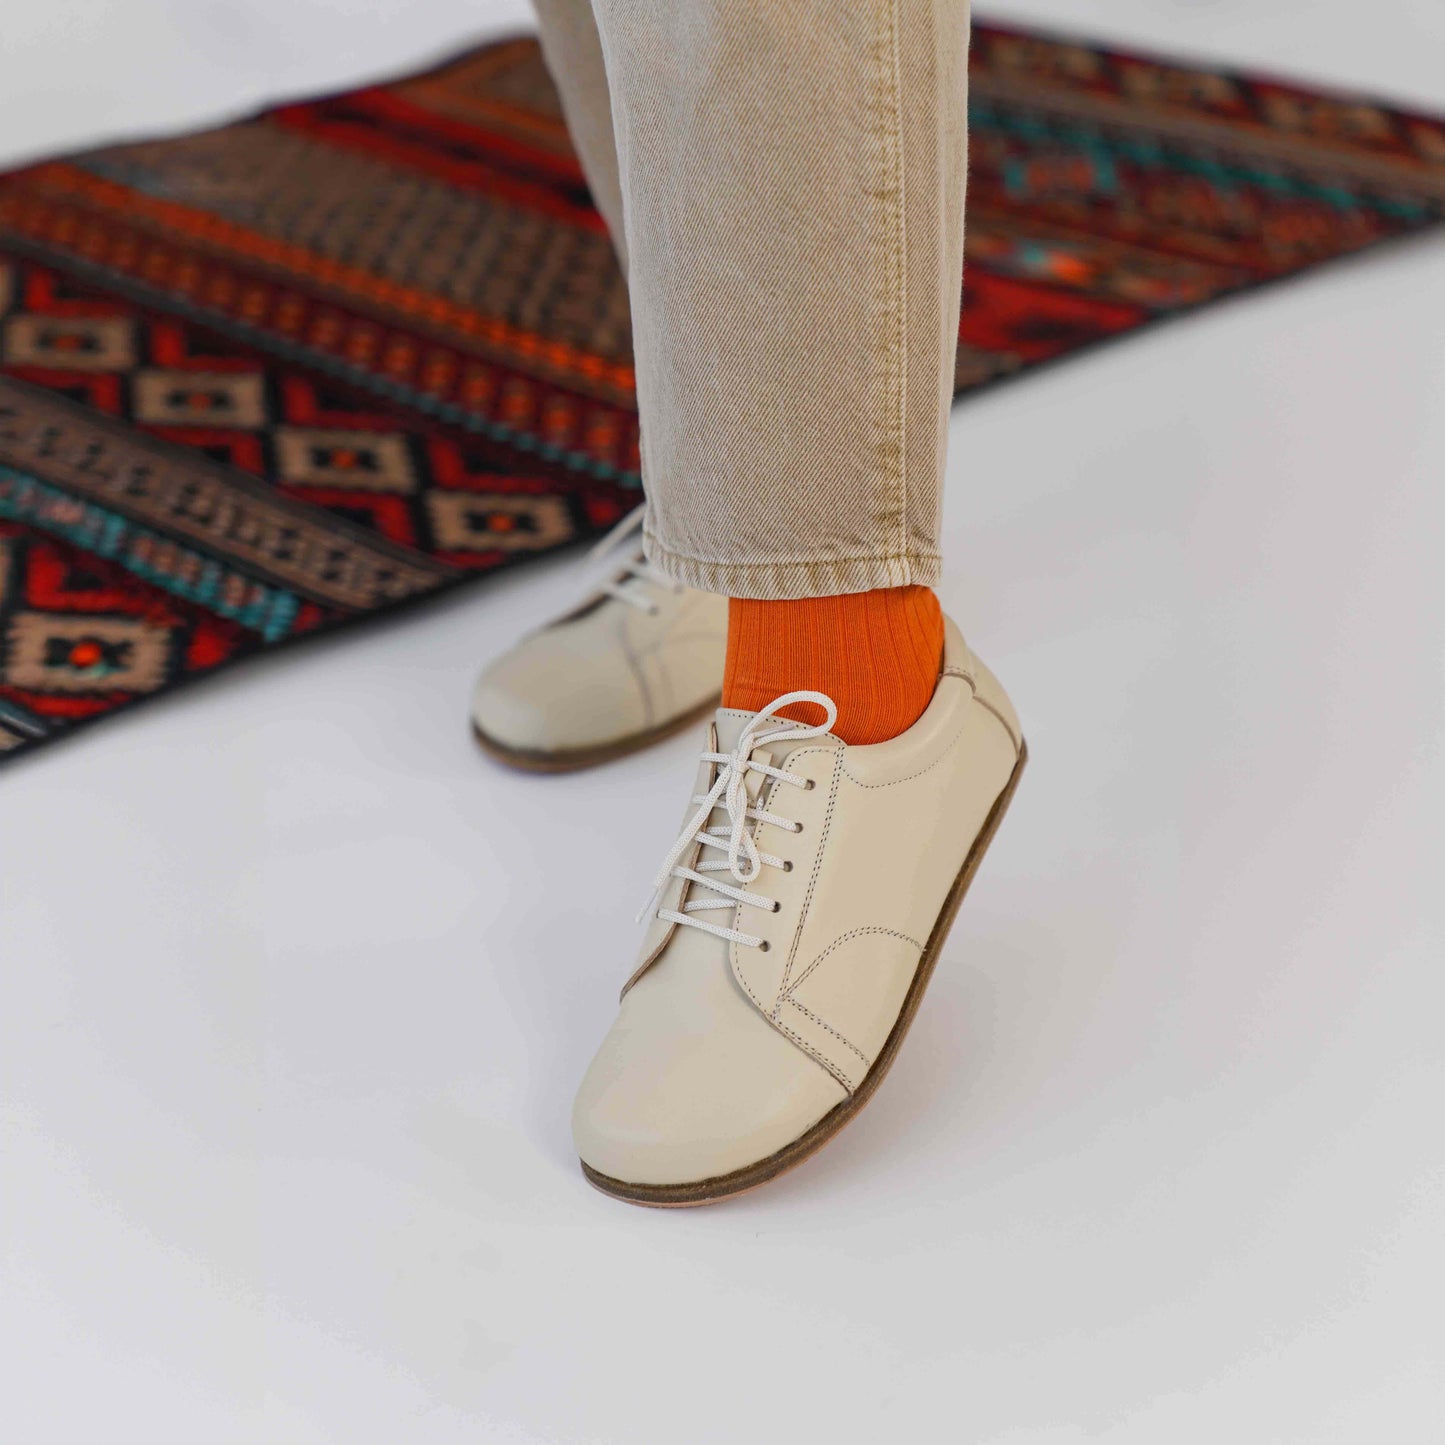 Beige leather barefoot women's sneakers in front of a rug, emphasizing the blend of traditional craftsmanship and modern style.